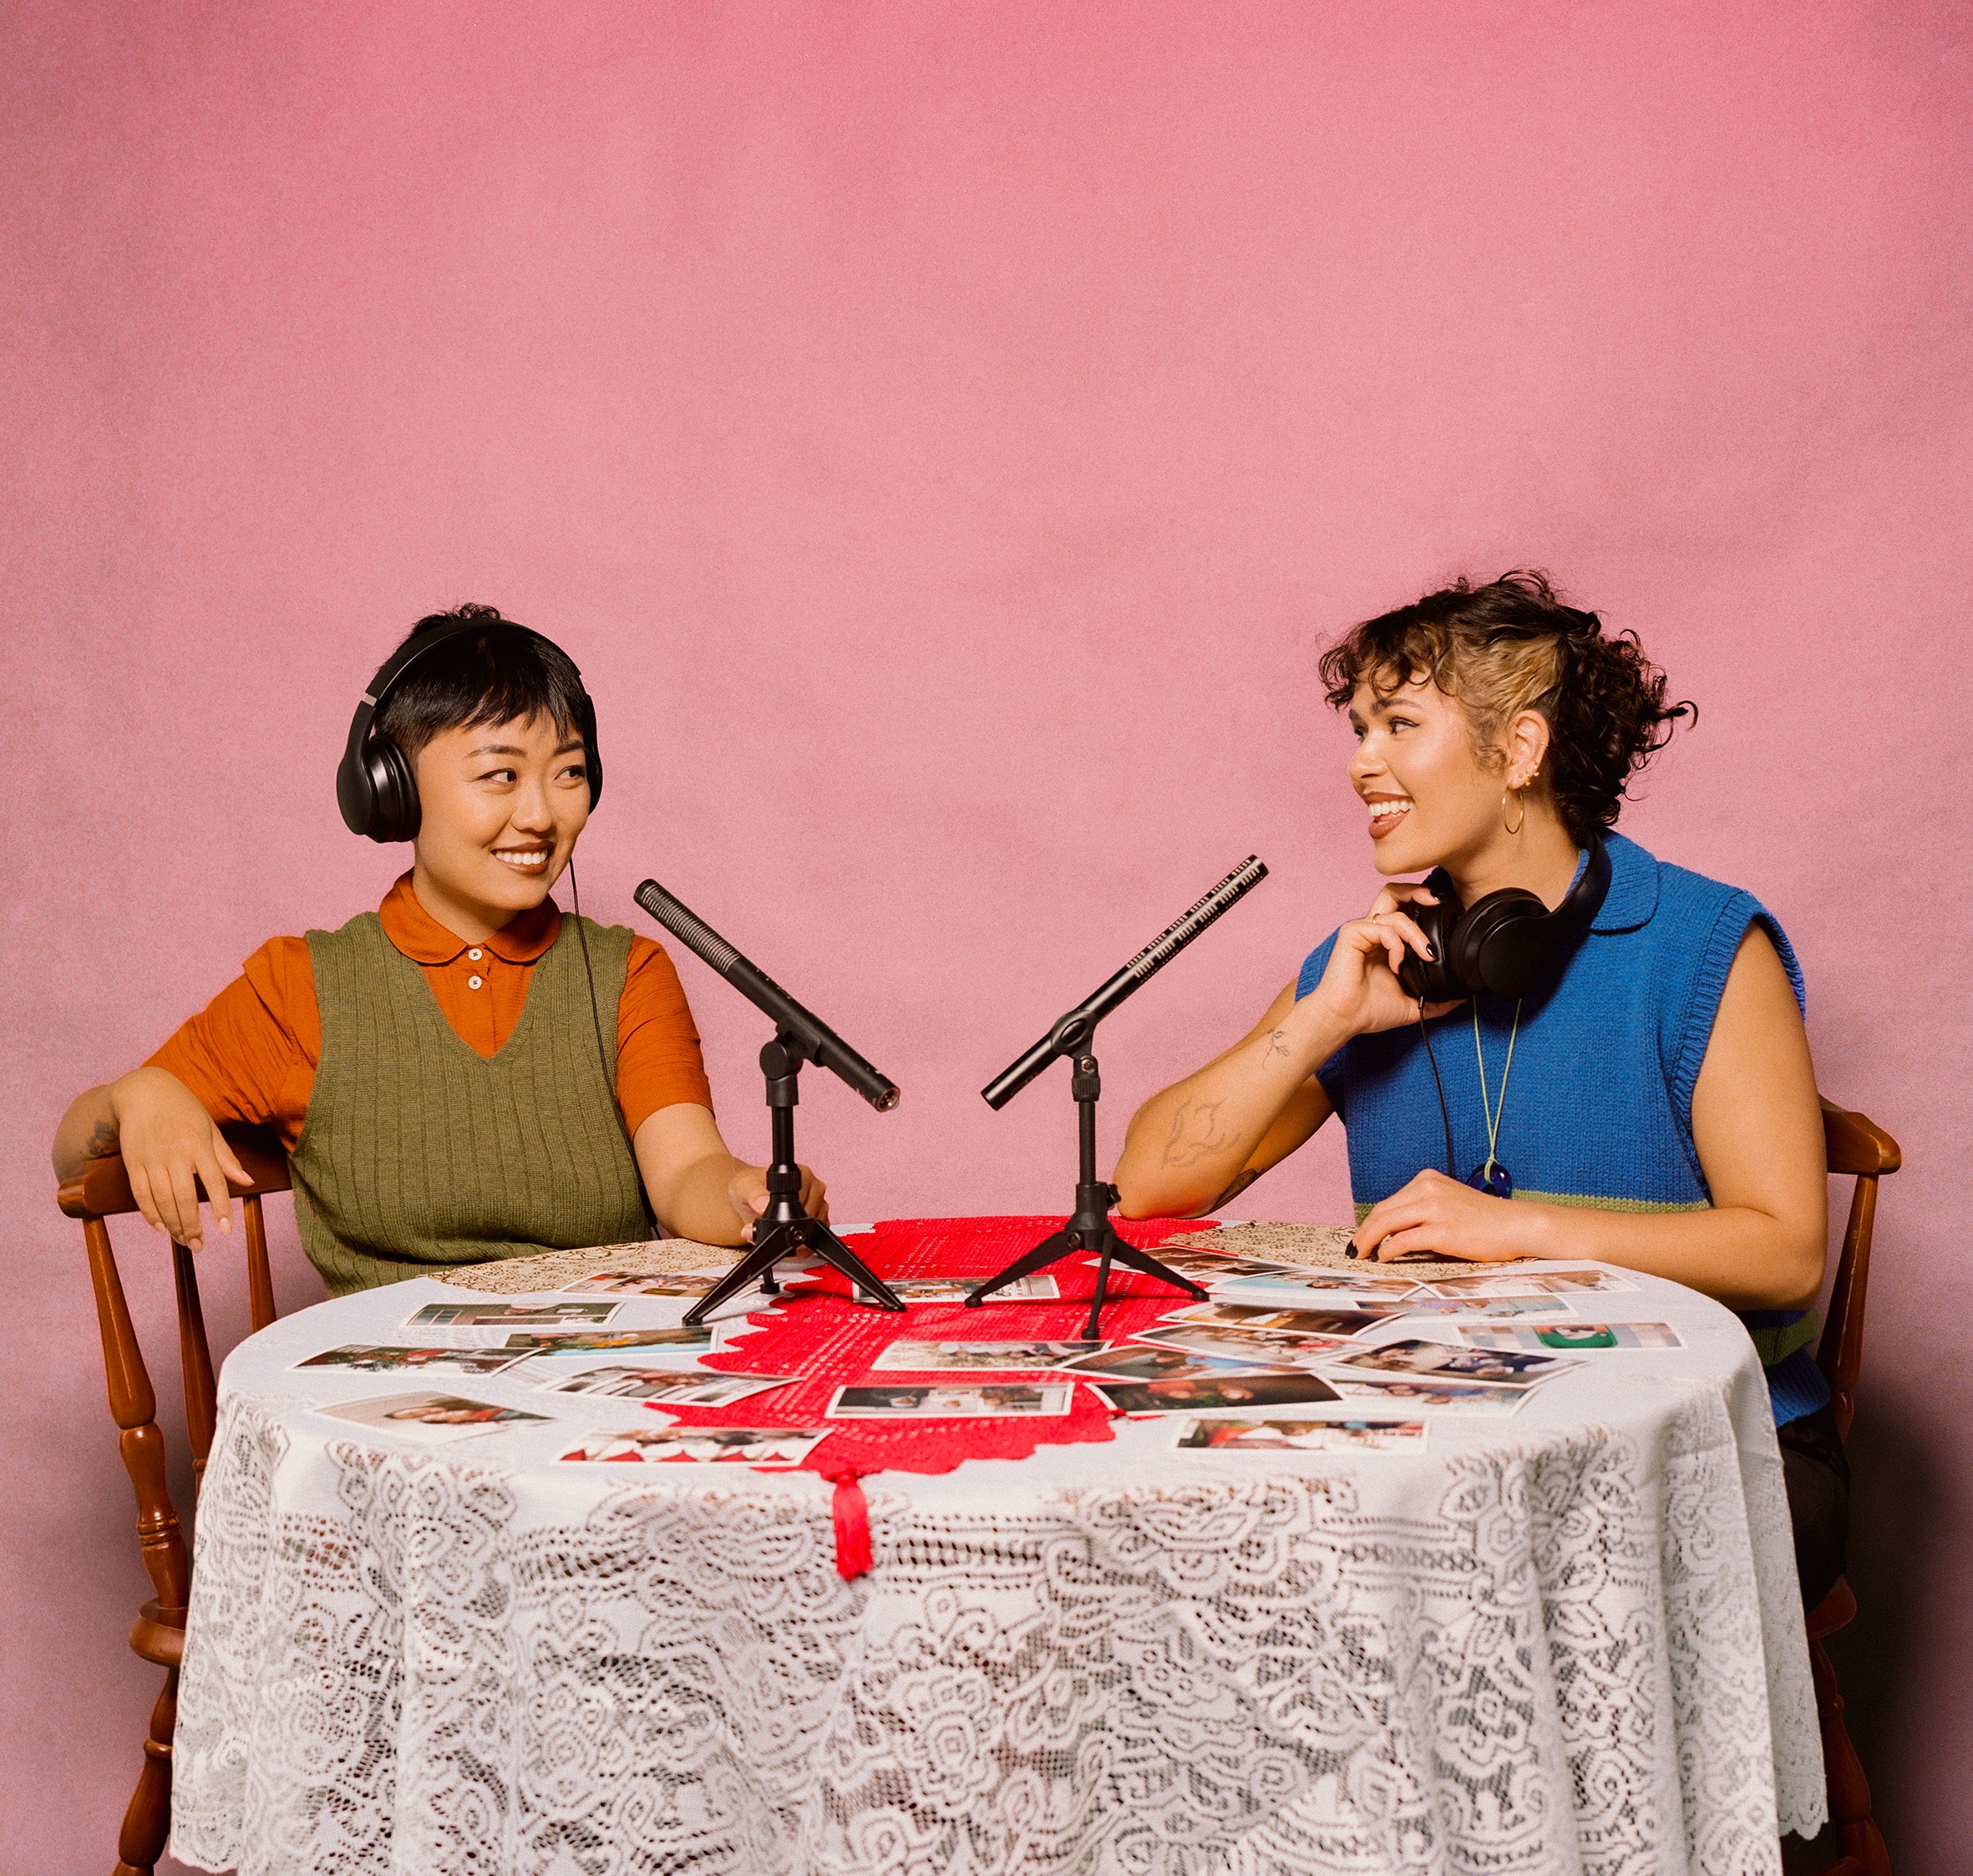 Two women sit at a lace-covered table in front of a pink wall. Microphones sit on the table along with photos spread across it. They each wear headphones.